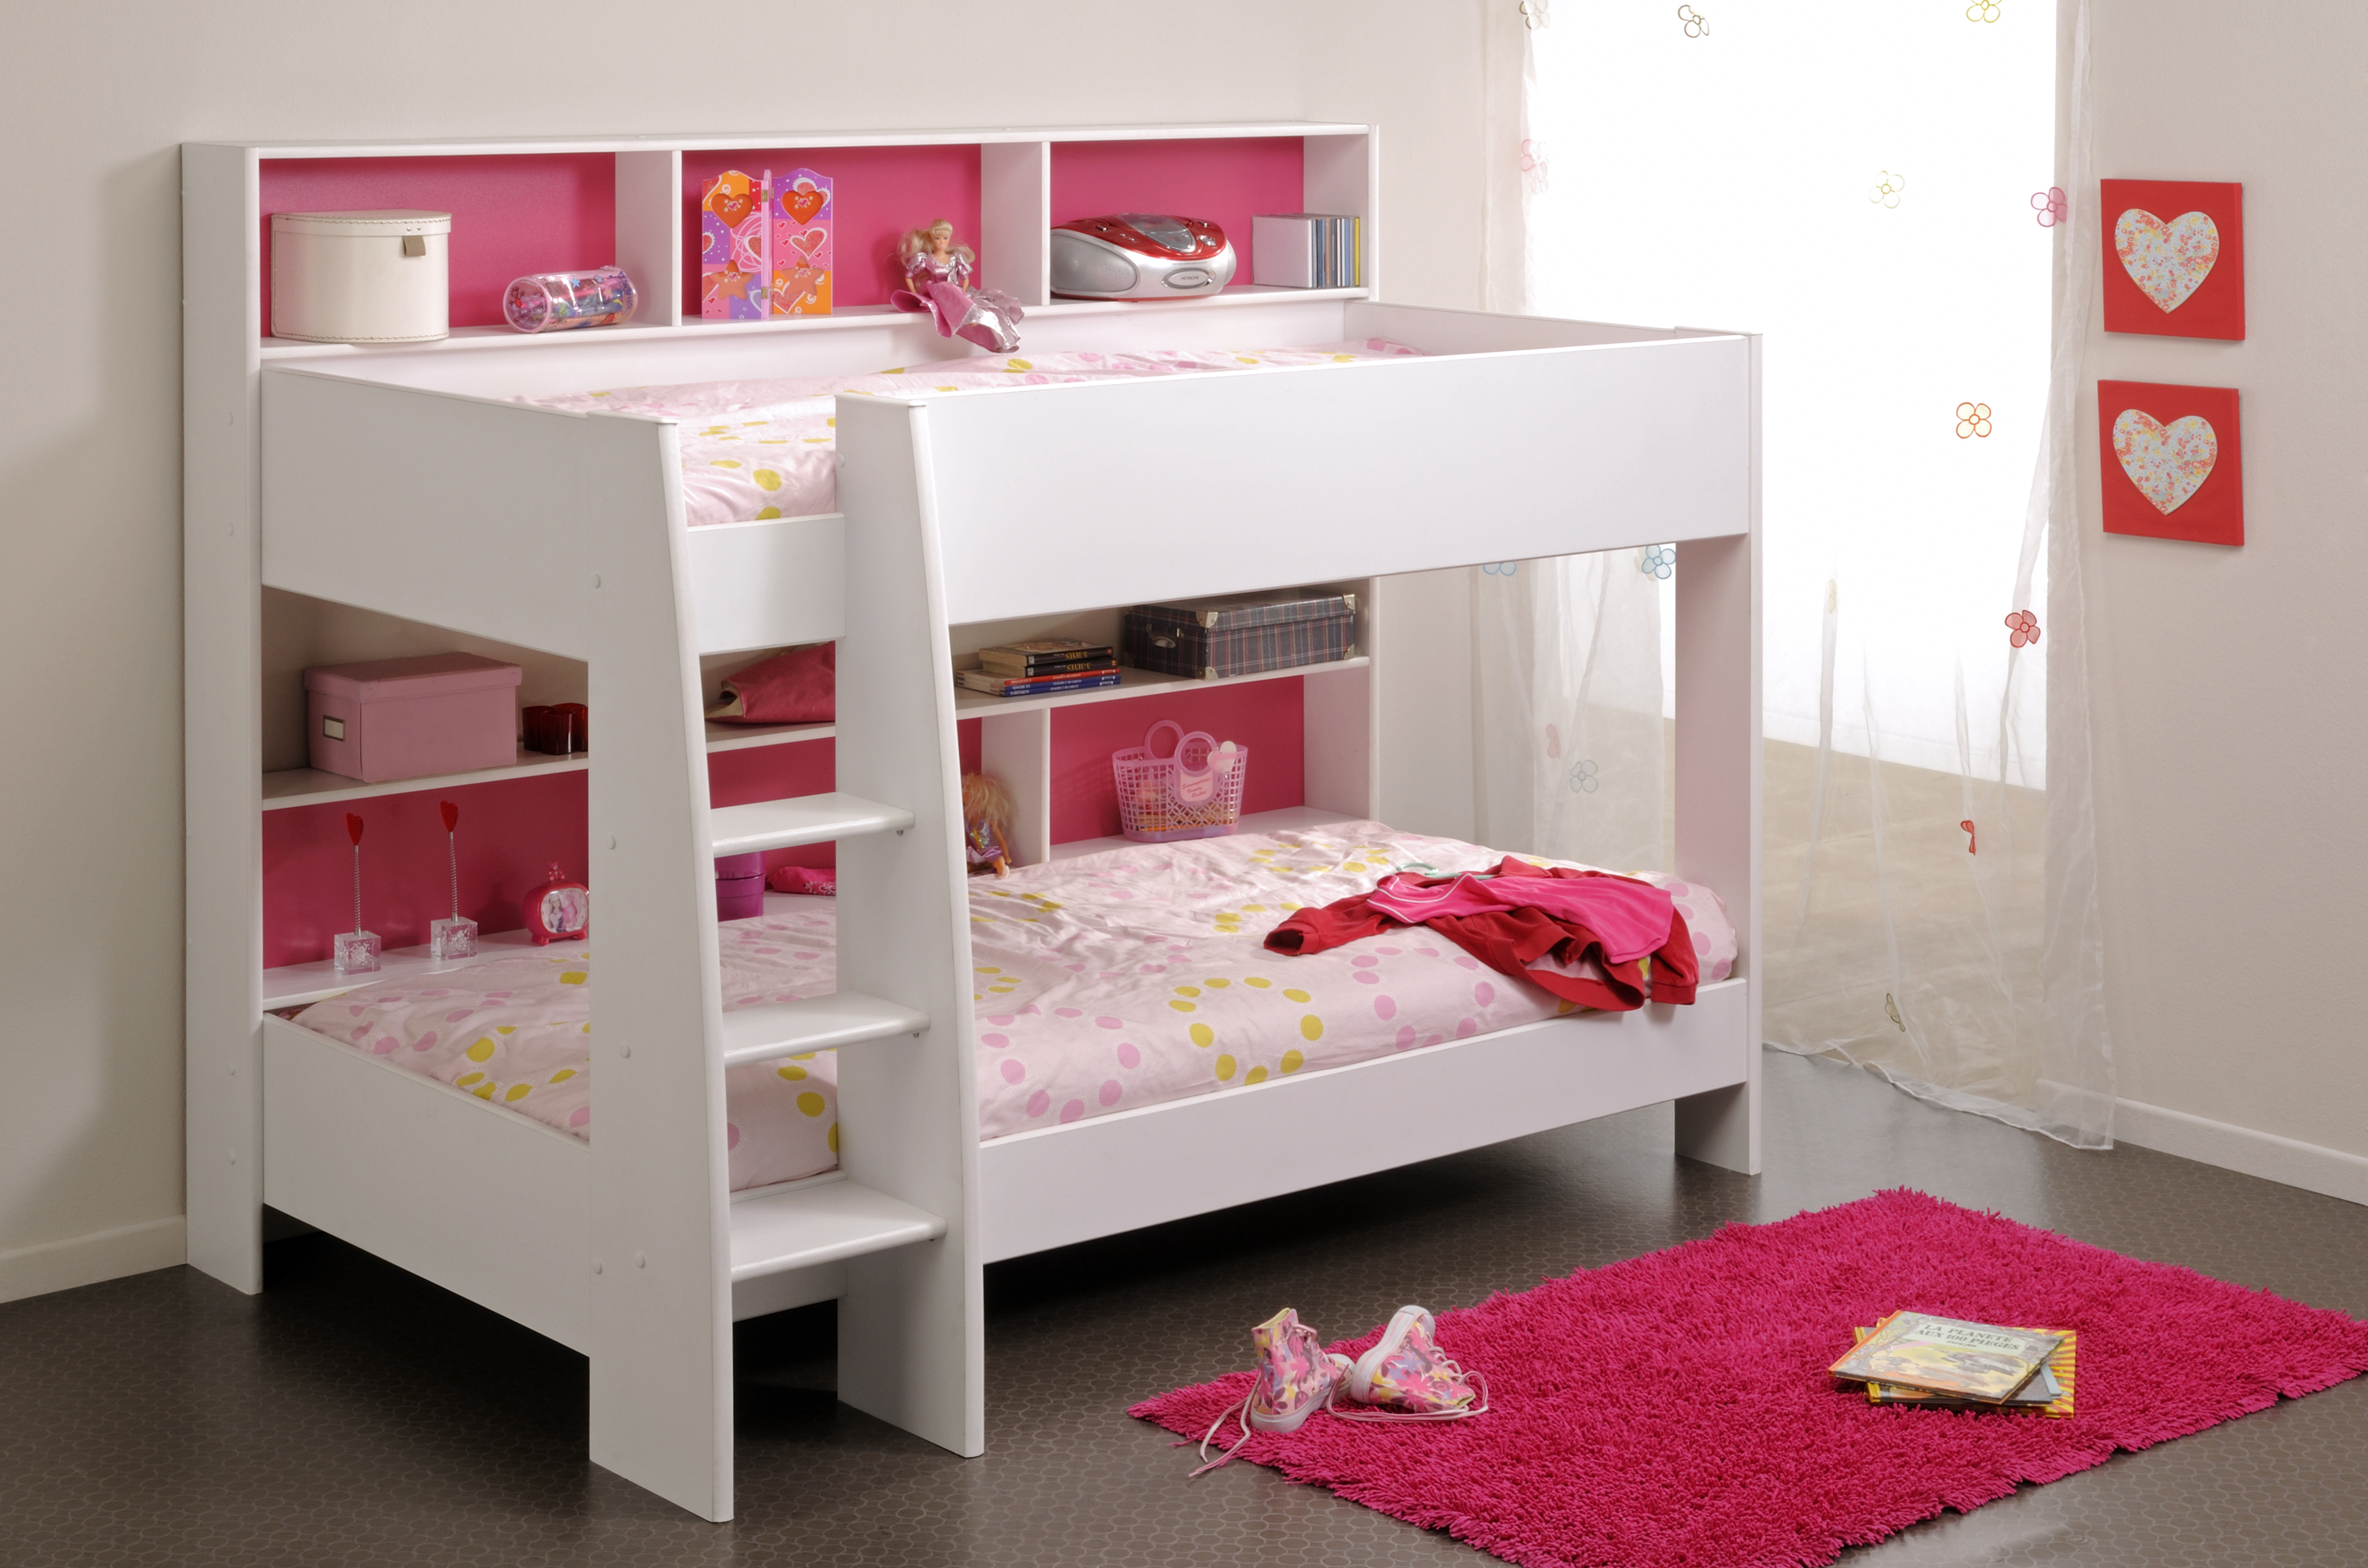 Space Function And Fun Bunk Beds Vs Twin Beds My Decorative